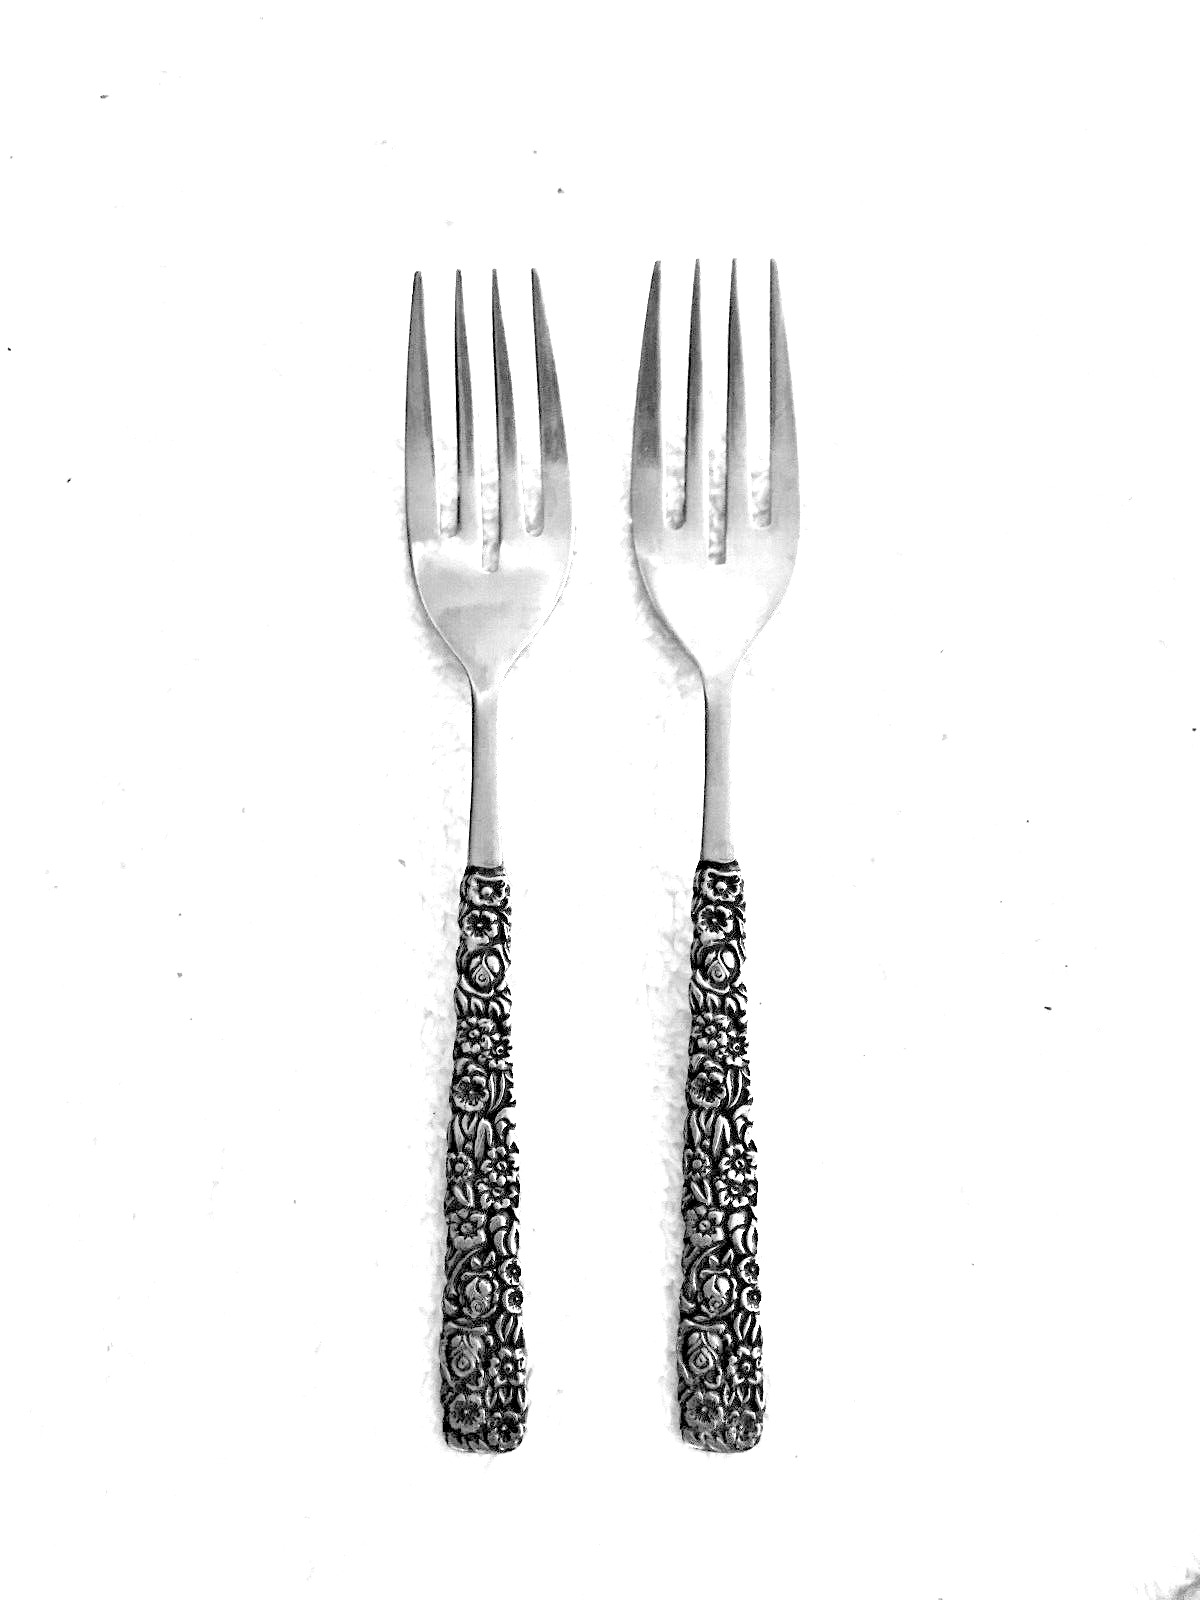 National Stainless Lady Charming 2 Salad Forks Stainless Japan